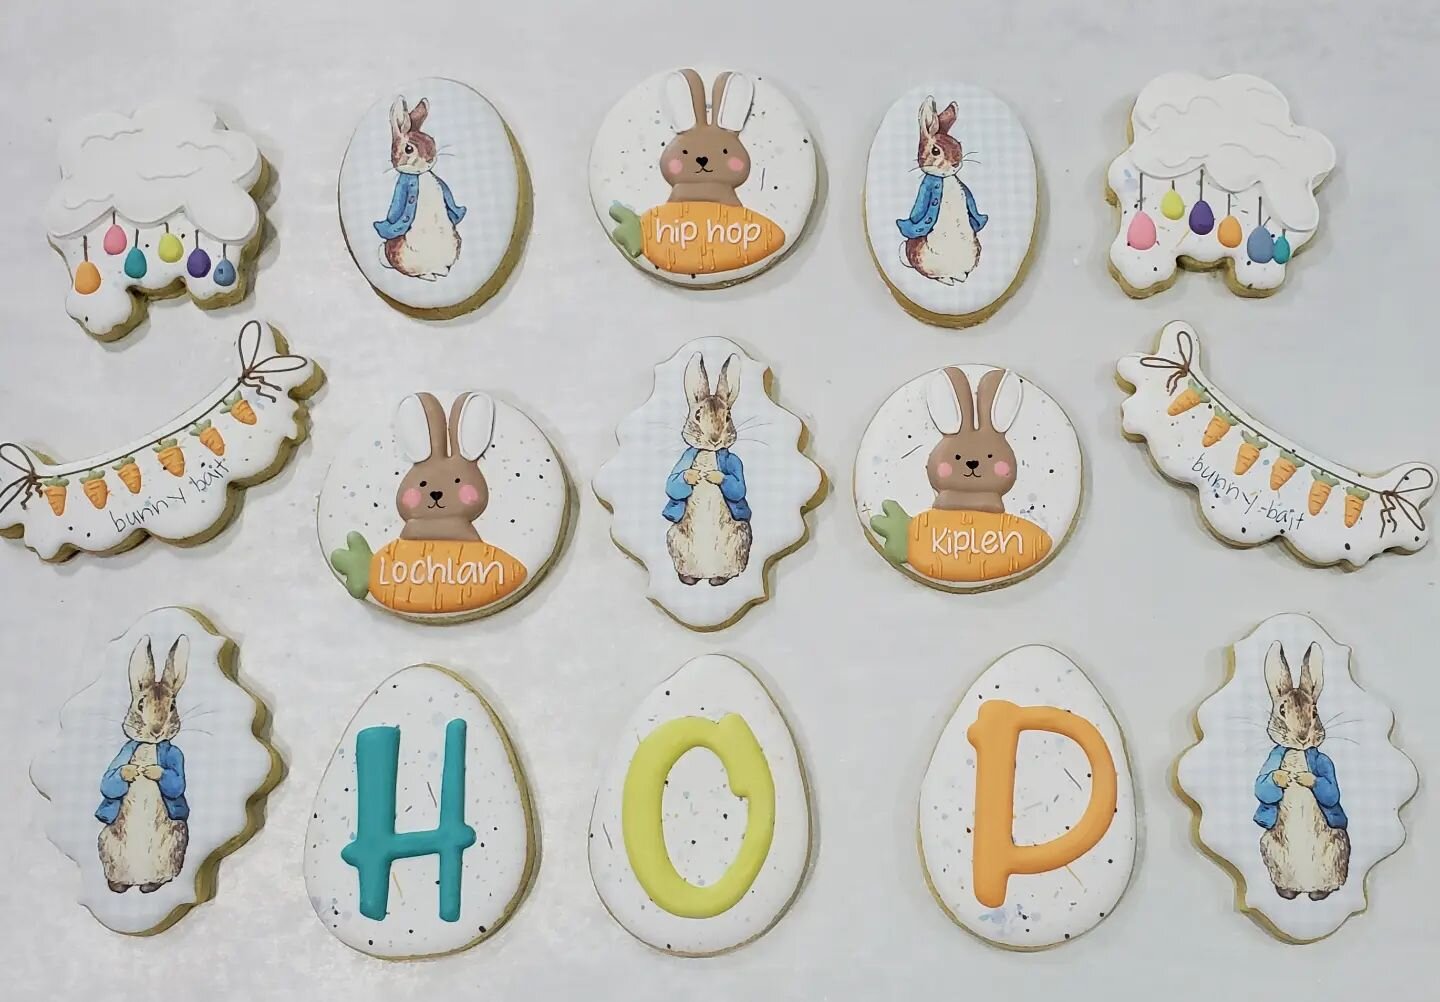 Happy Easter to those that celebrate it! 
Happy Chocolate bunny weekend to those that celebrate that!
Happy Sunday to those that are just enjoying a beautiful day! ❤️ 

#easterbunny #eastercookies #easter #easterchocolate #sunday #spring #peterrabbit